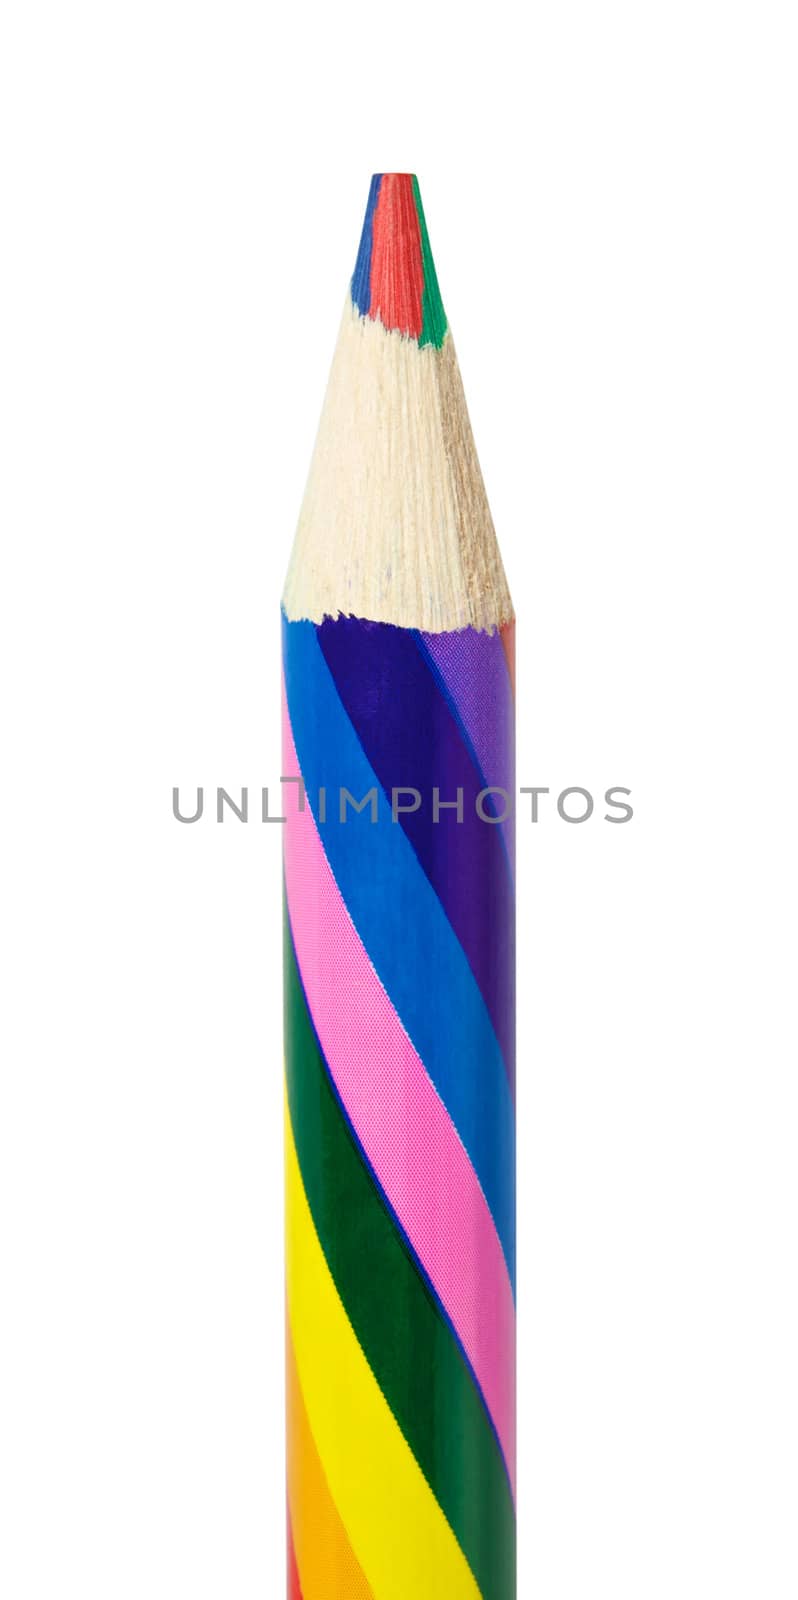 Colorful Pencil by petr_malyshev